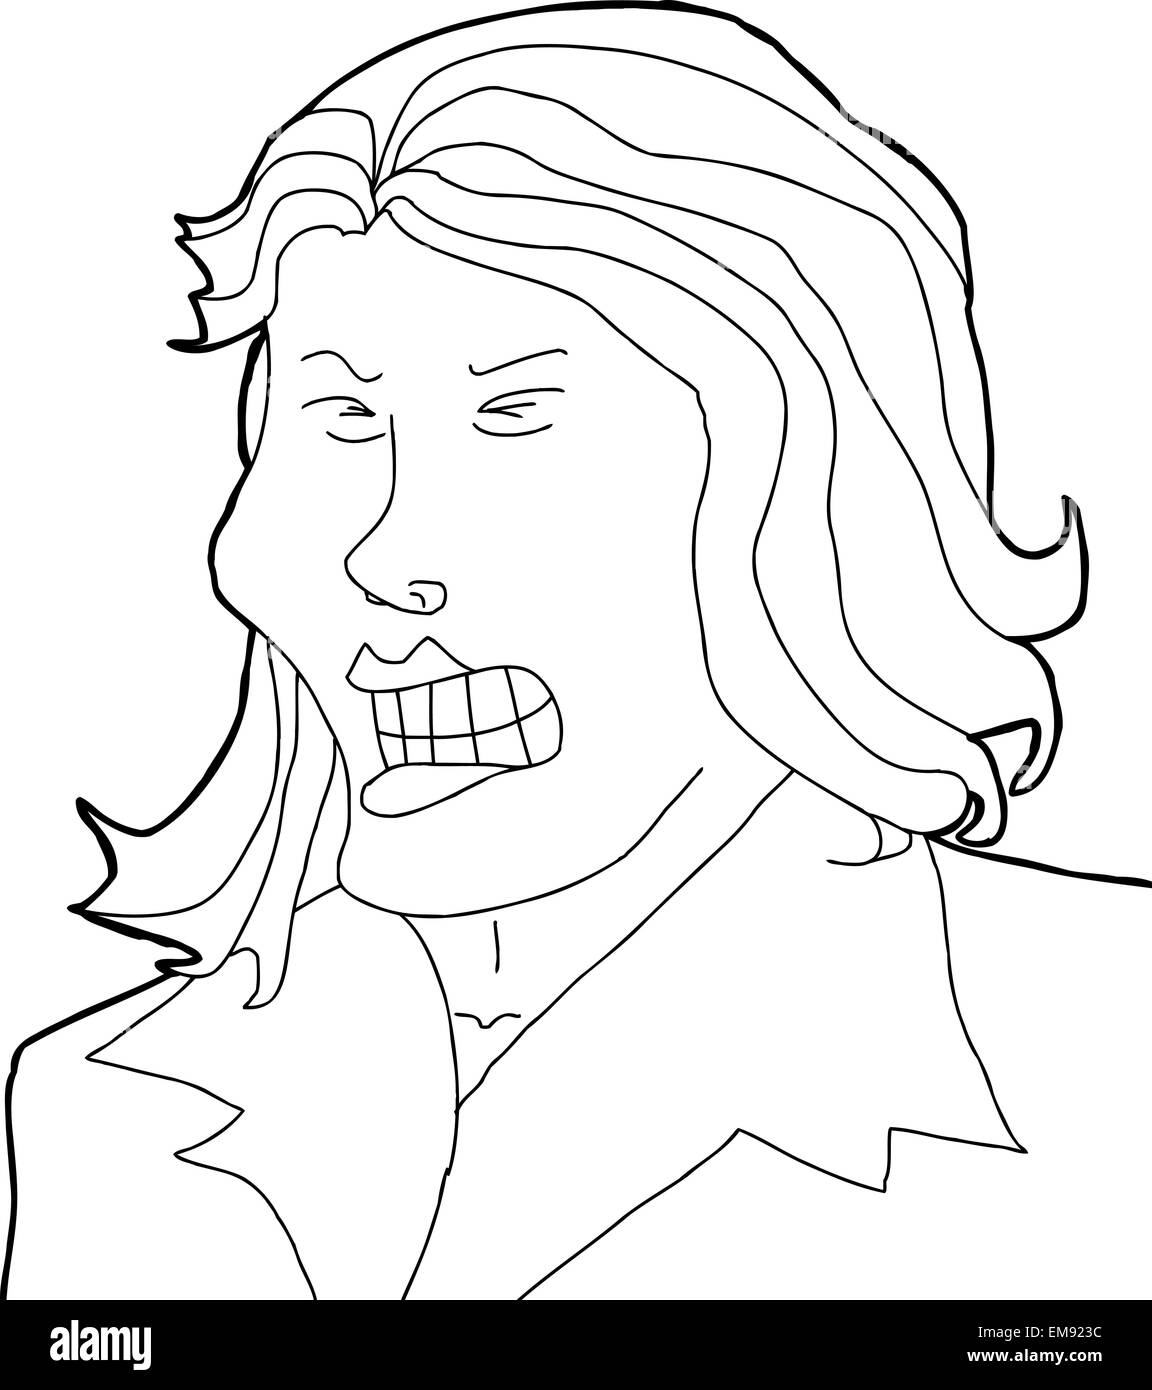 Hand drawn illustration of outline of angry woman Stock Photo